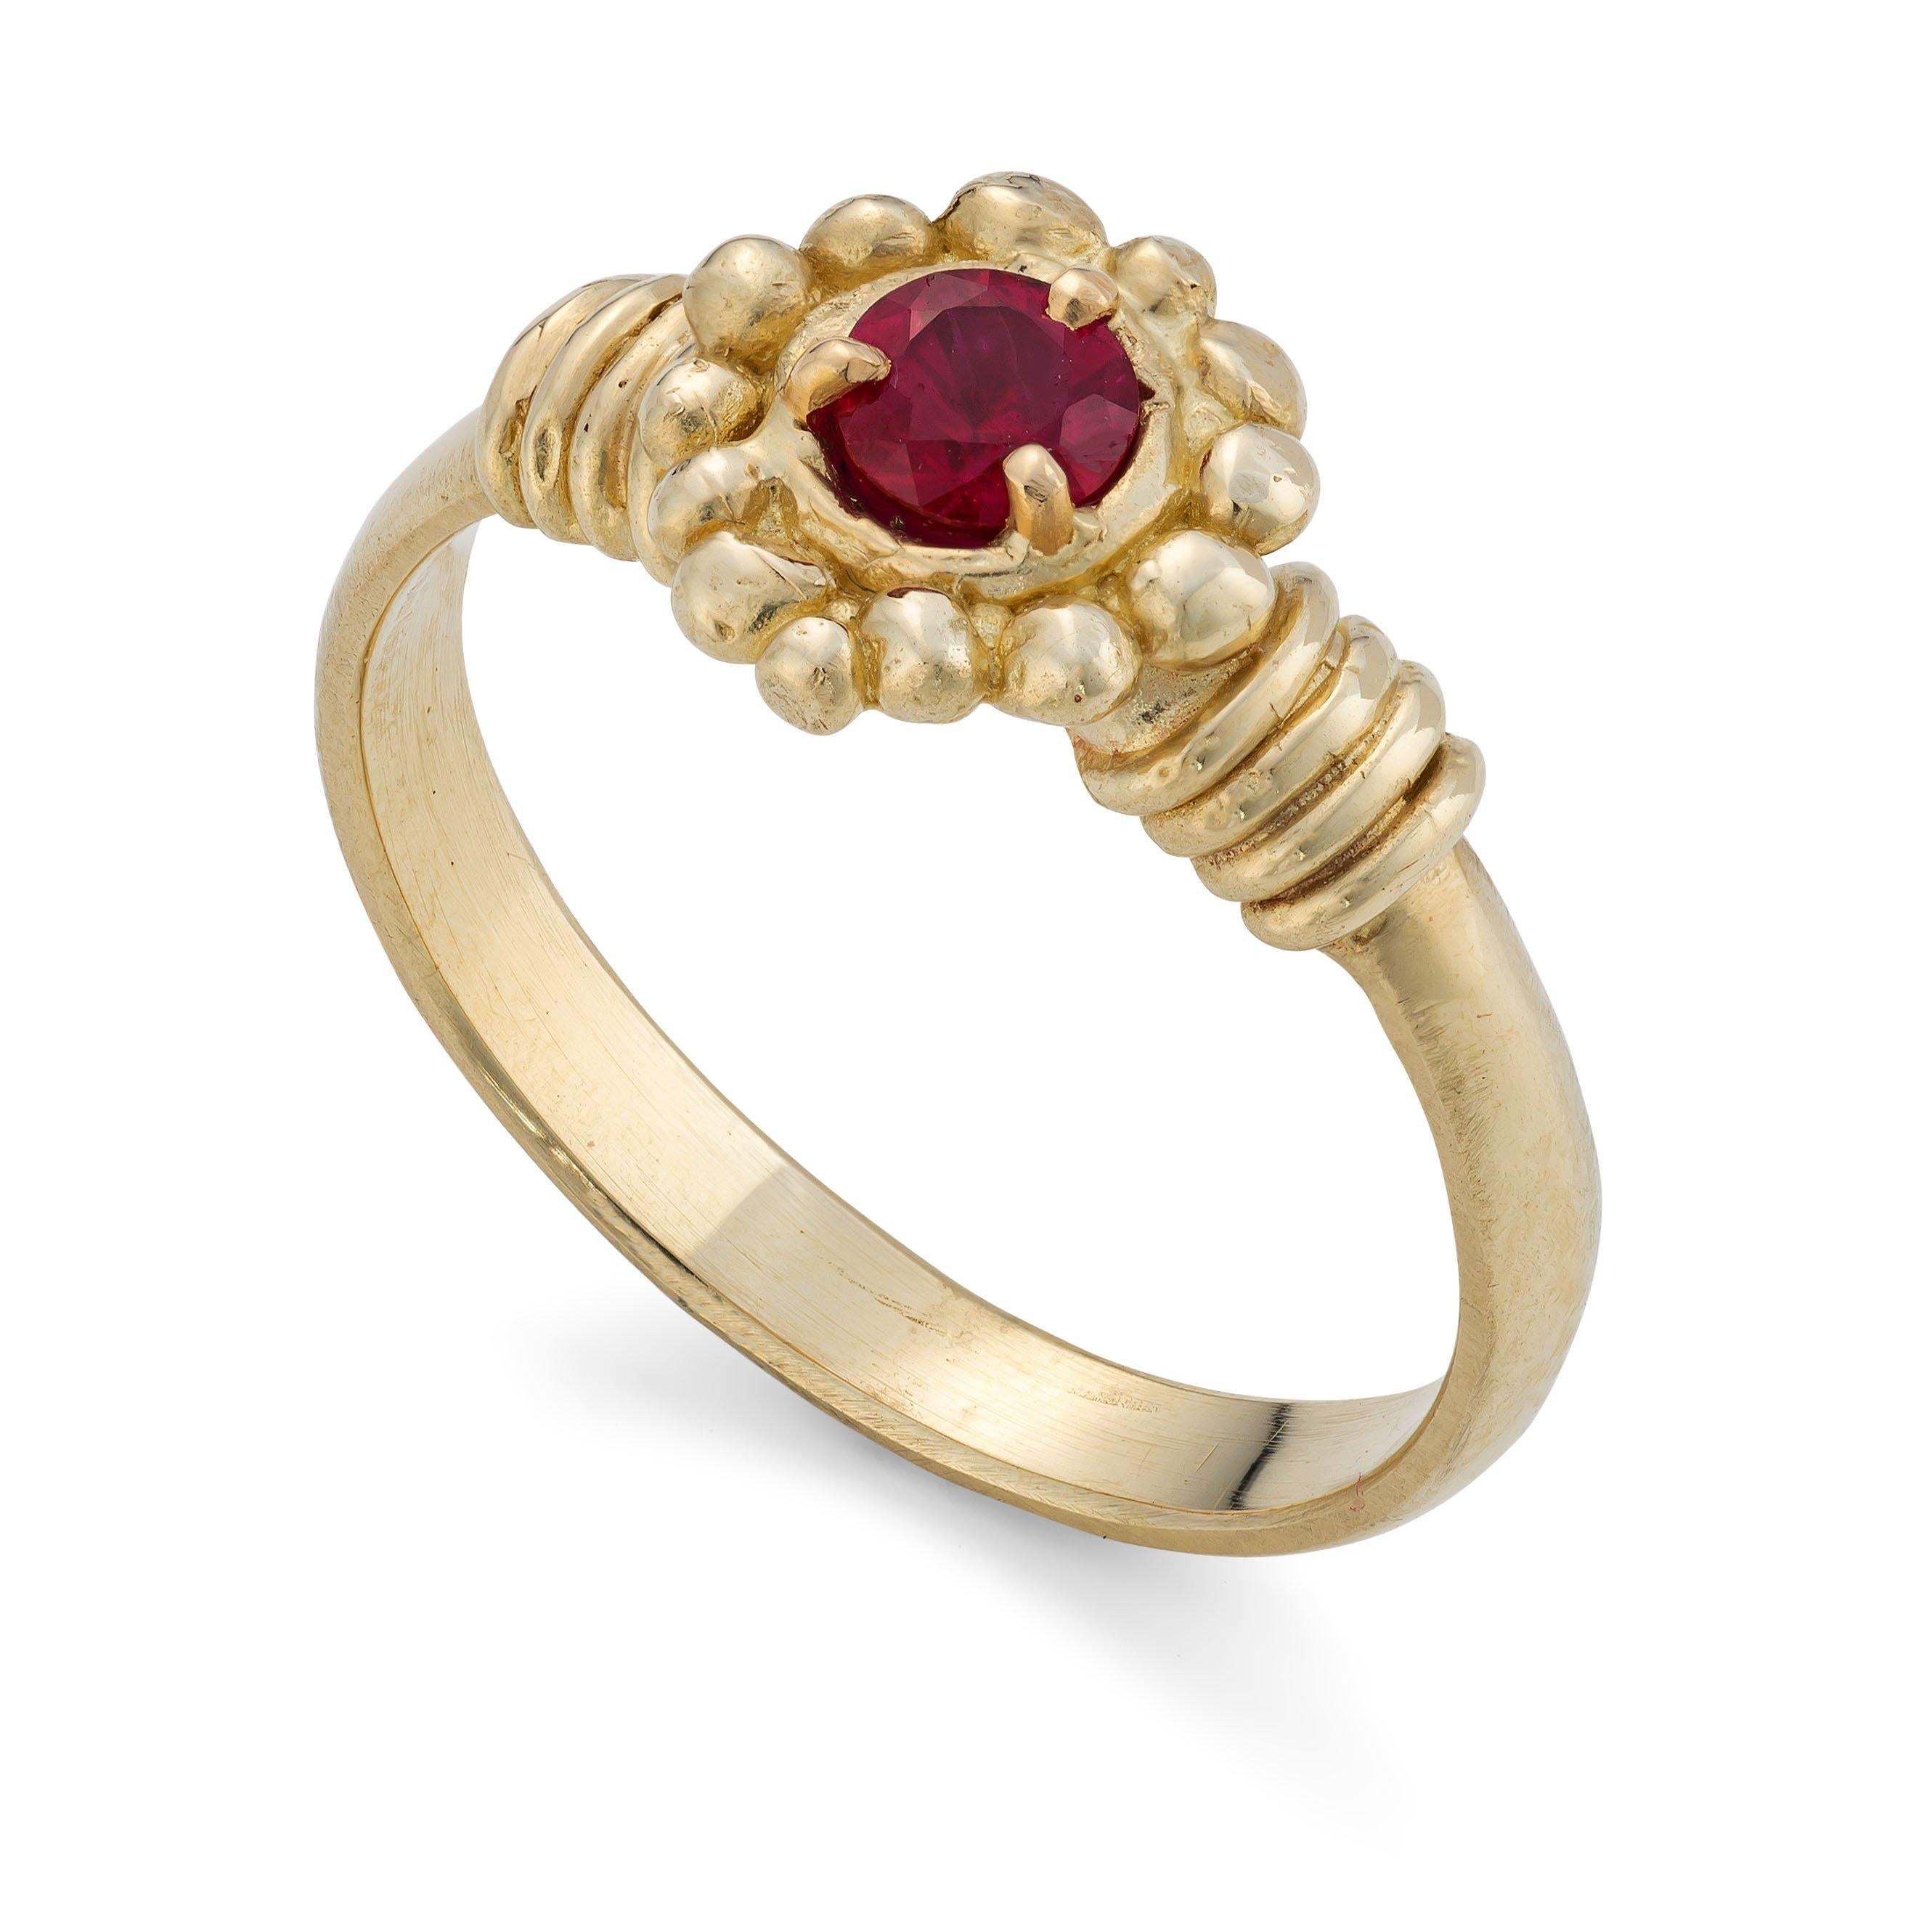 Kalimeris Ring, 18 Karat Yellow Gold with Ruby
Handcrafted and individually cast in 18-karat gold. Olivia carves each piece from wax, making these items unique, which we believe is what gives them their beauty.
The Kalimeris is a flower from the